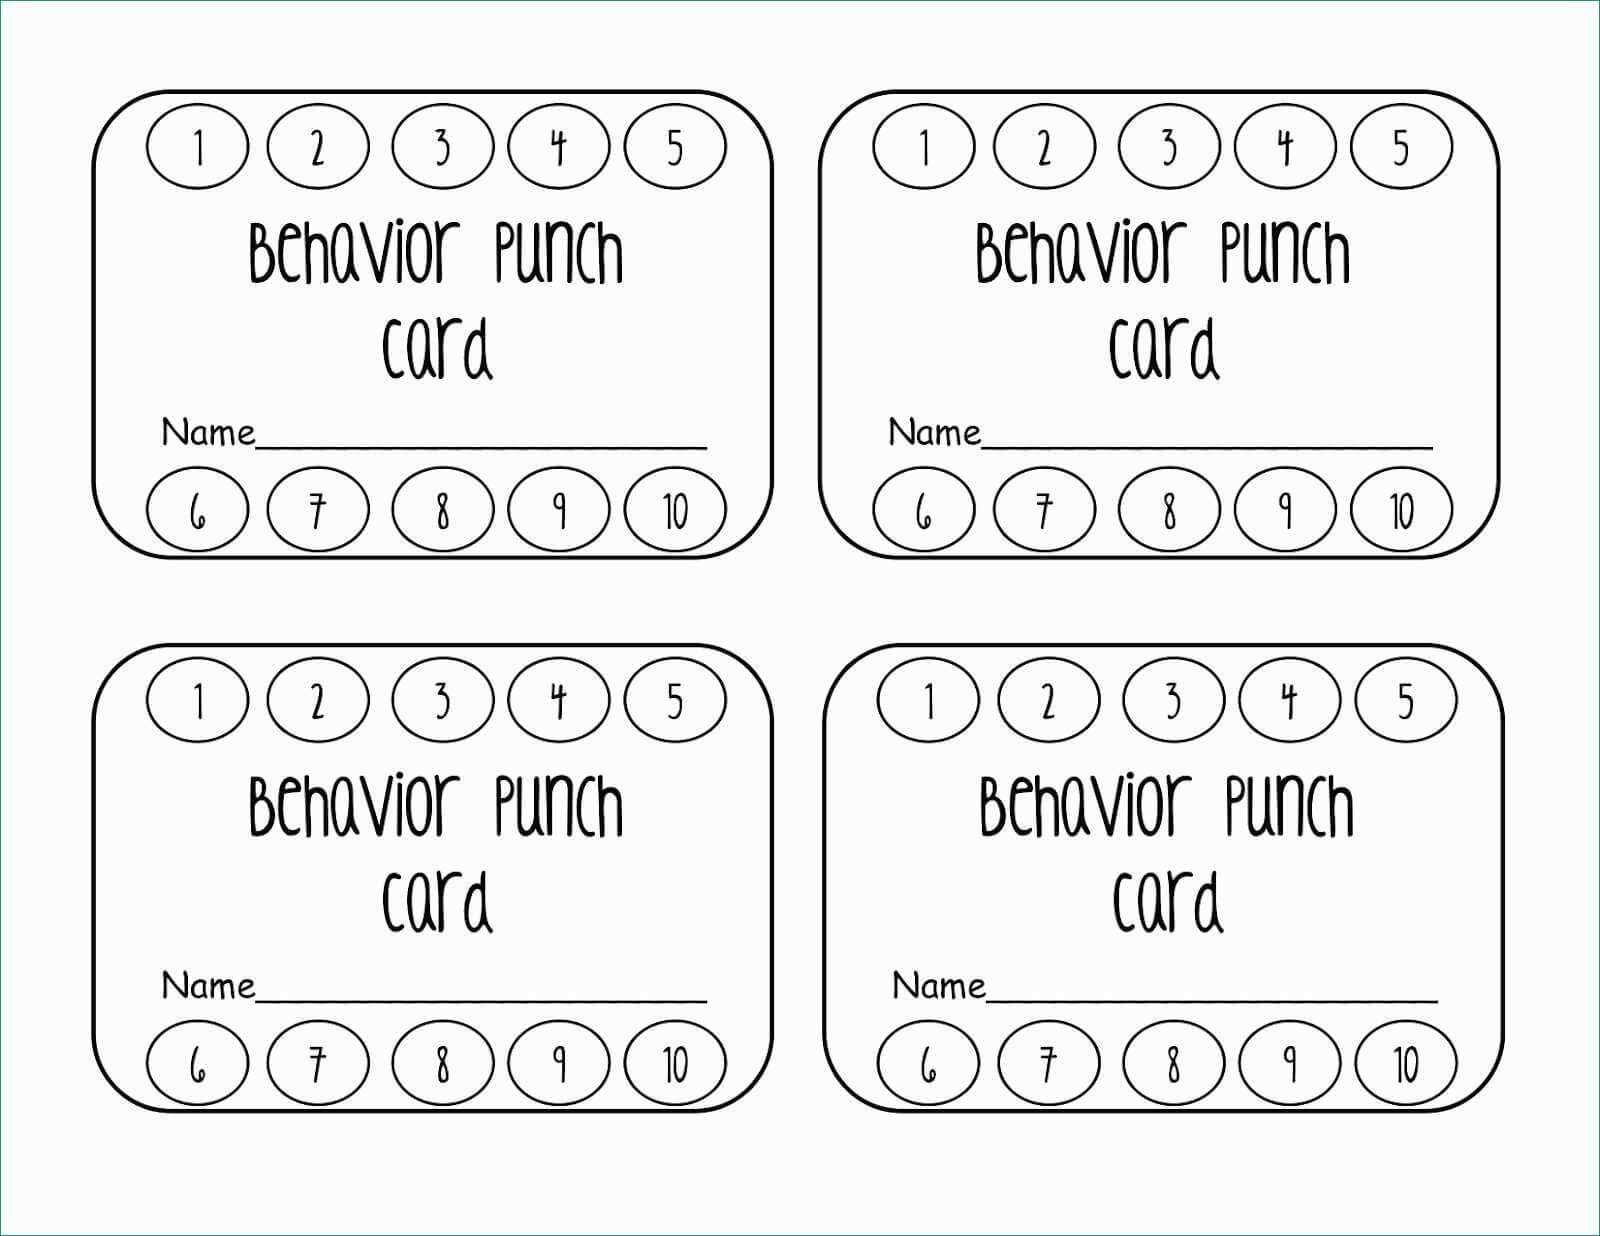 The Best Free Printable Punch Cards | Chapman Blog Inside Reward Punch Card Template